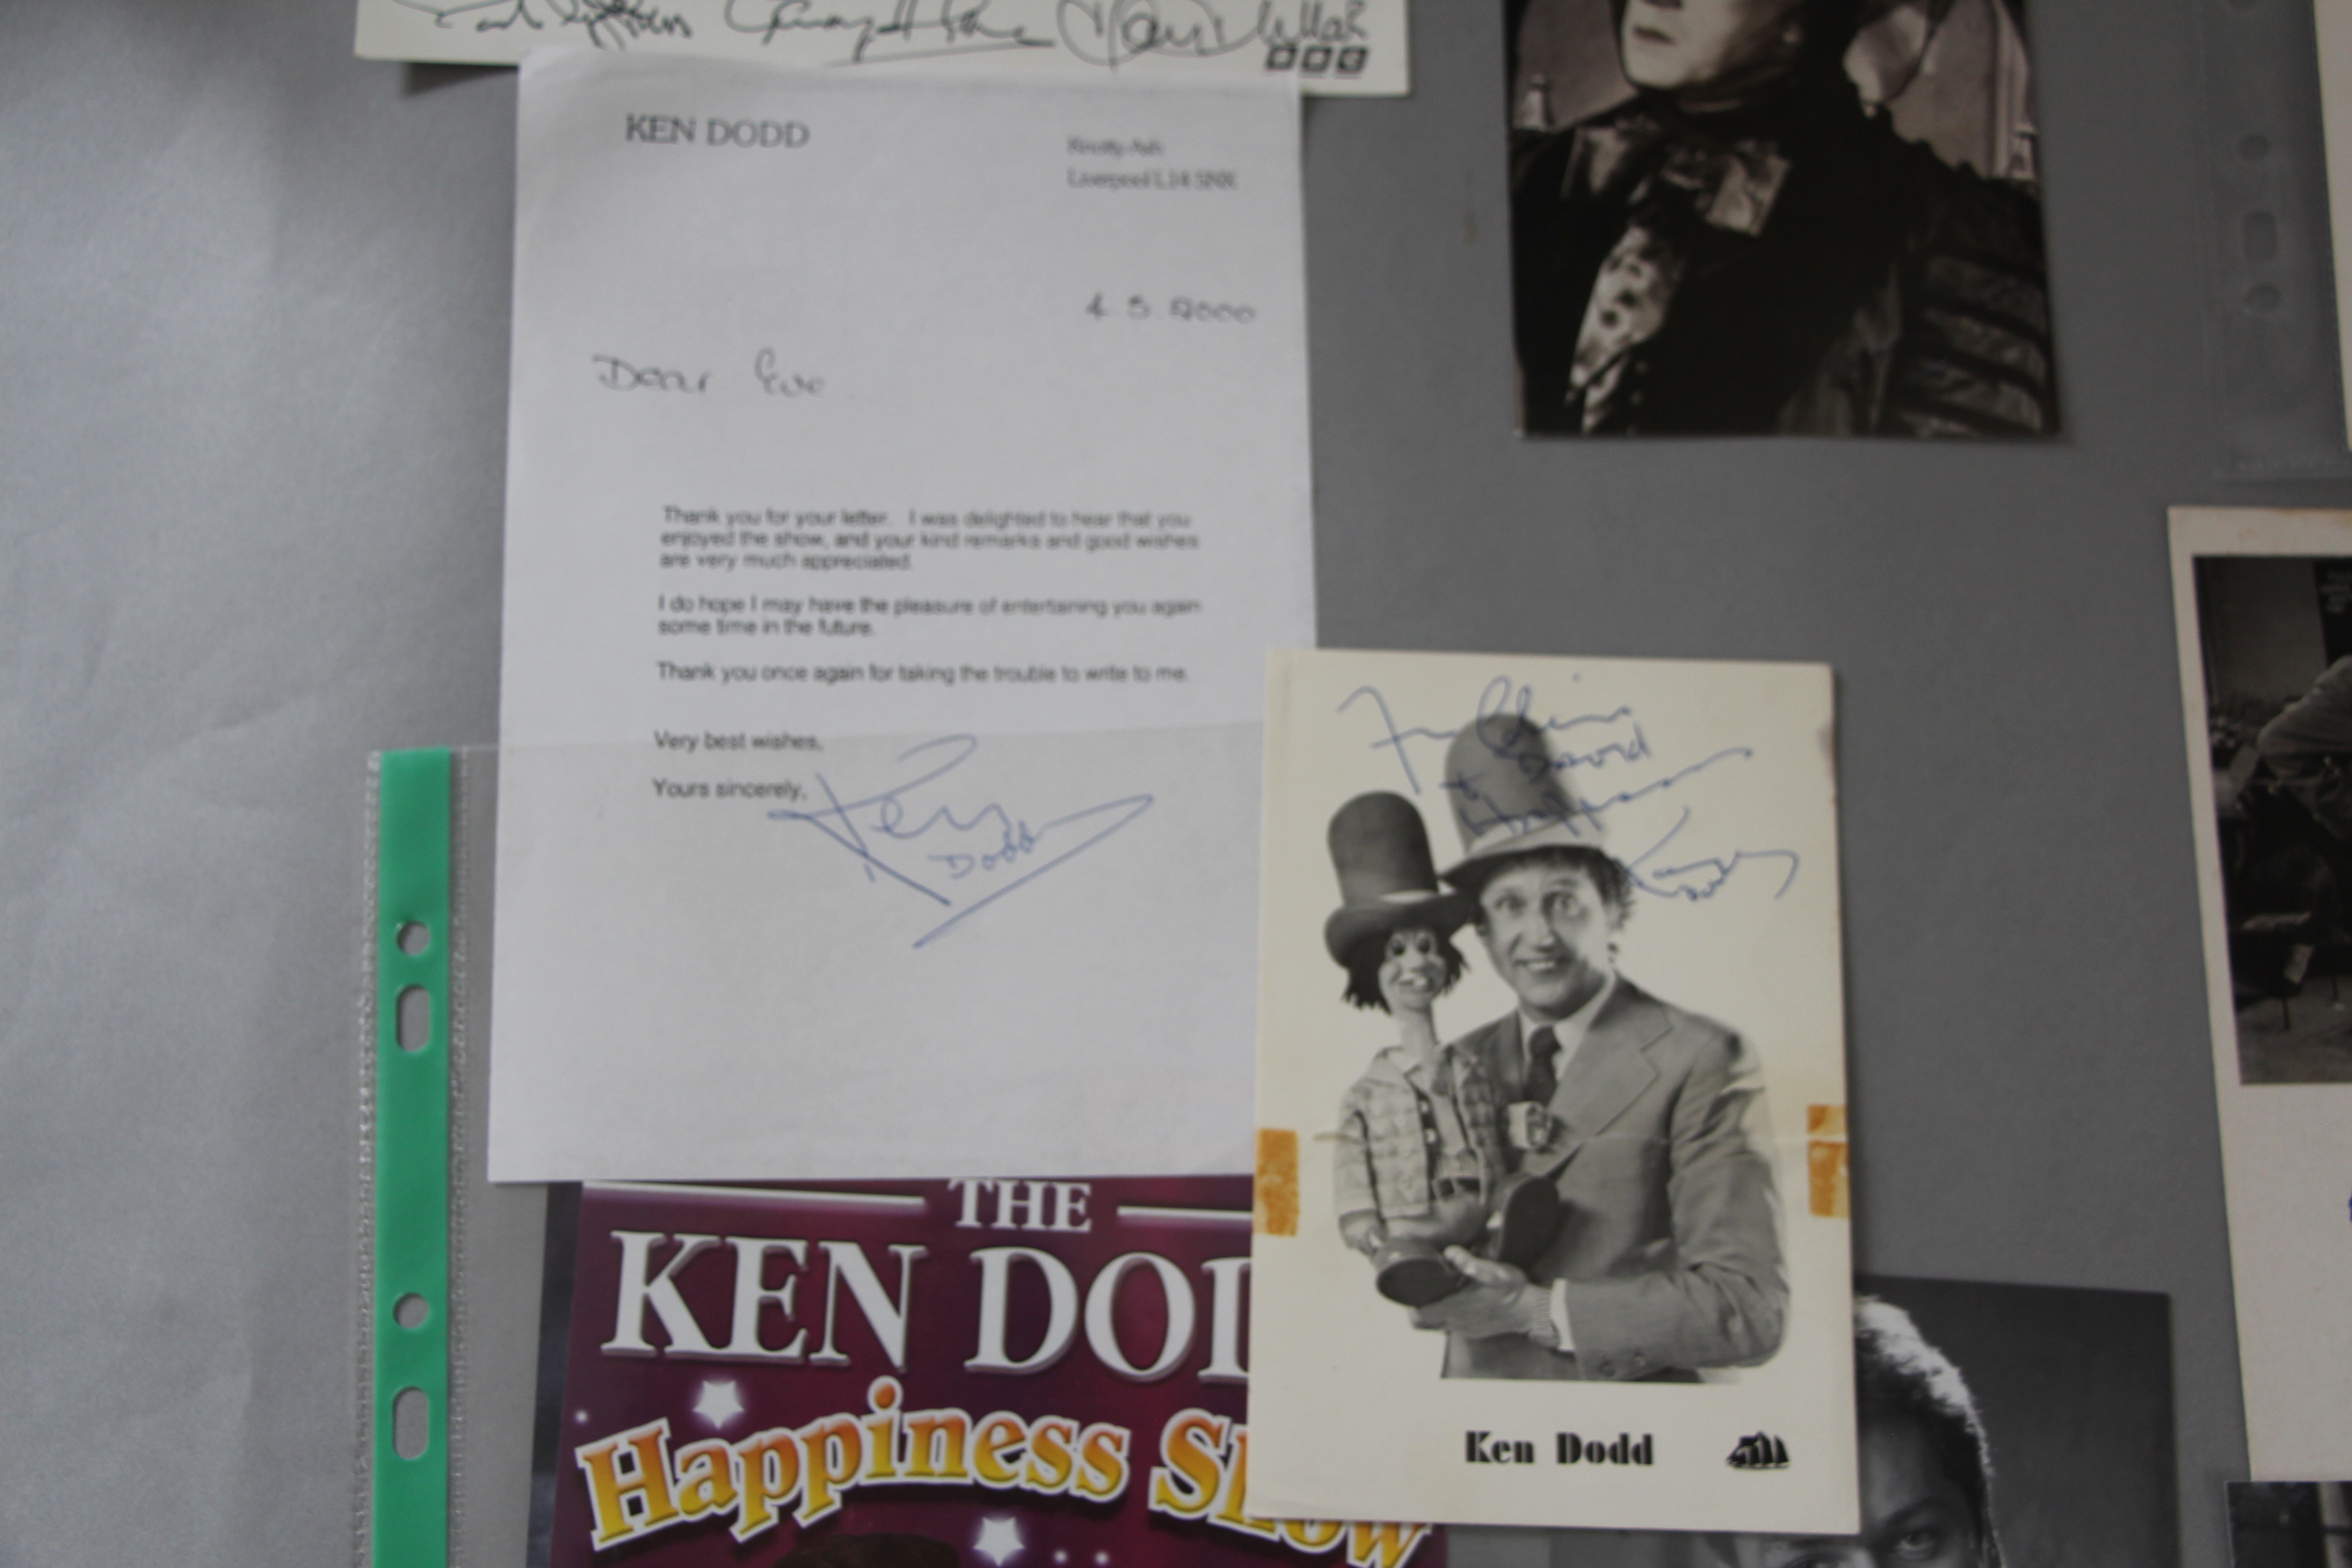 Collection of autographs many of which are on photos including Alec Guinness, John Hurt, - Image 3 of 7